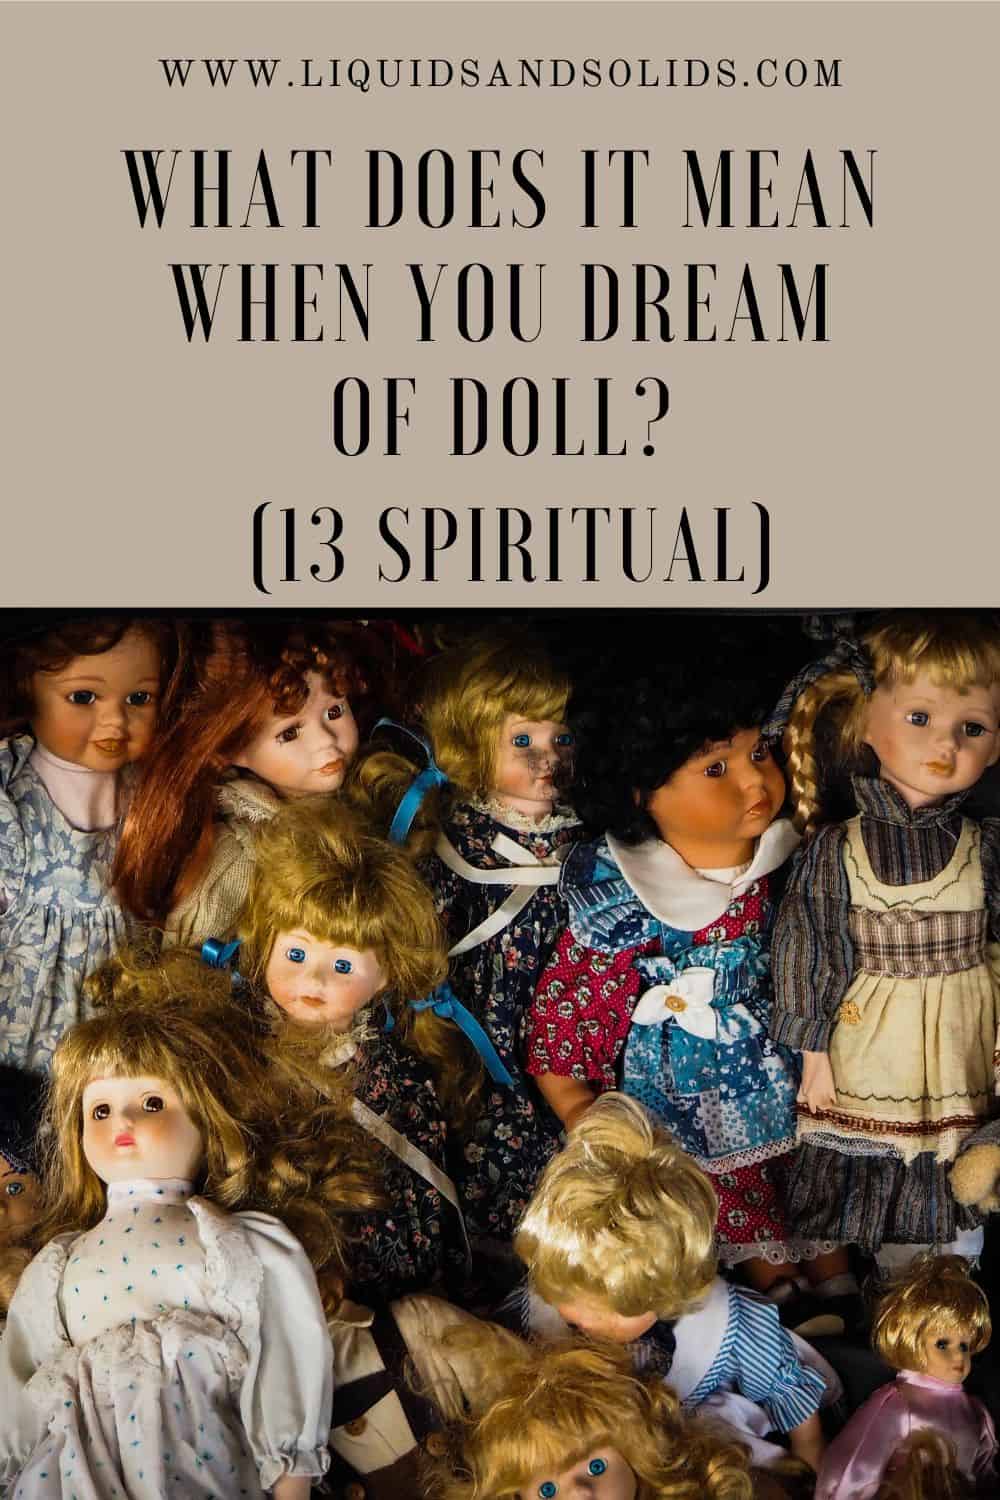 What Does It Mean When You Dream Of Doll (13 Spiritual)v